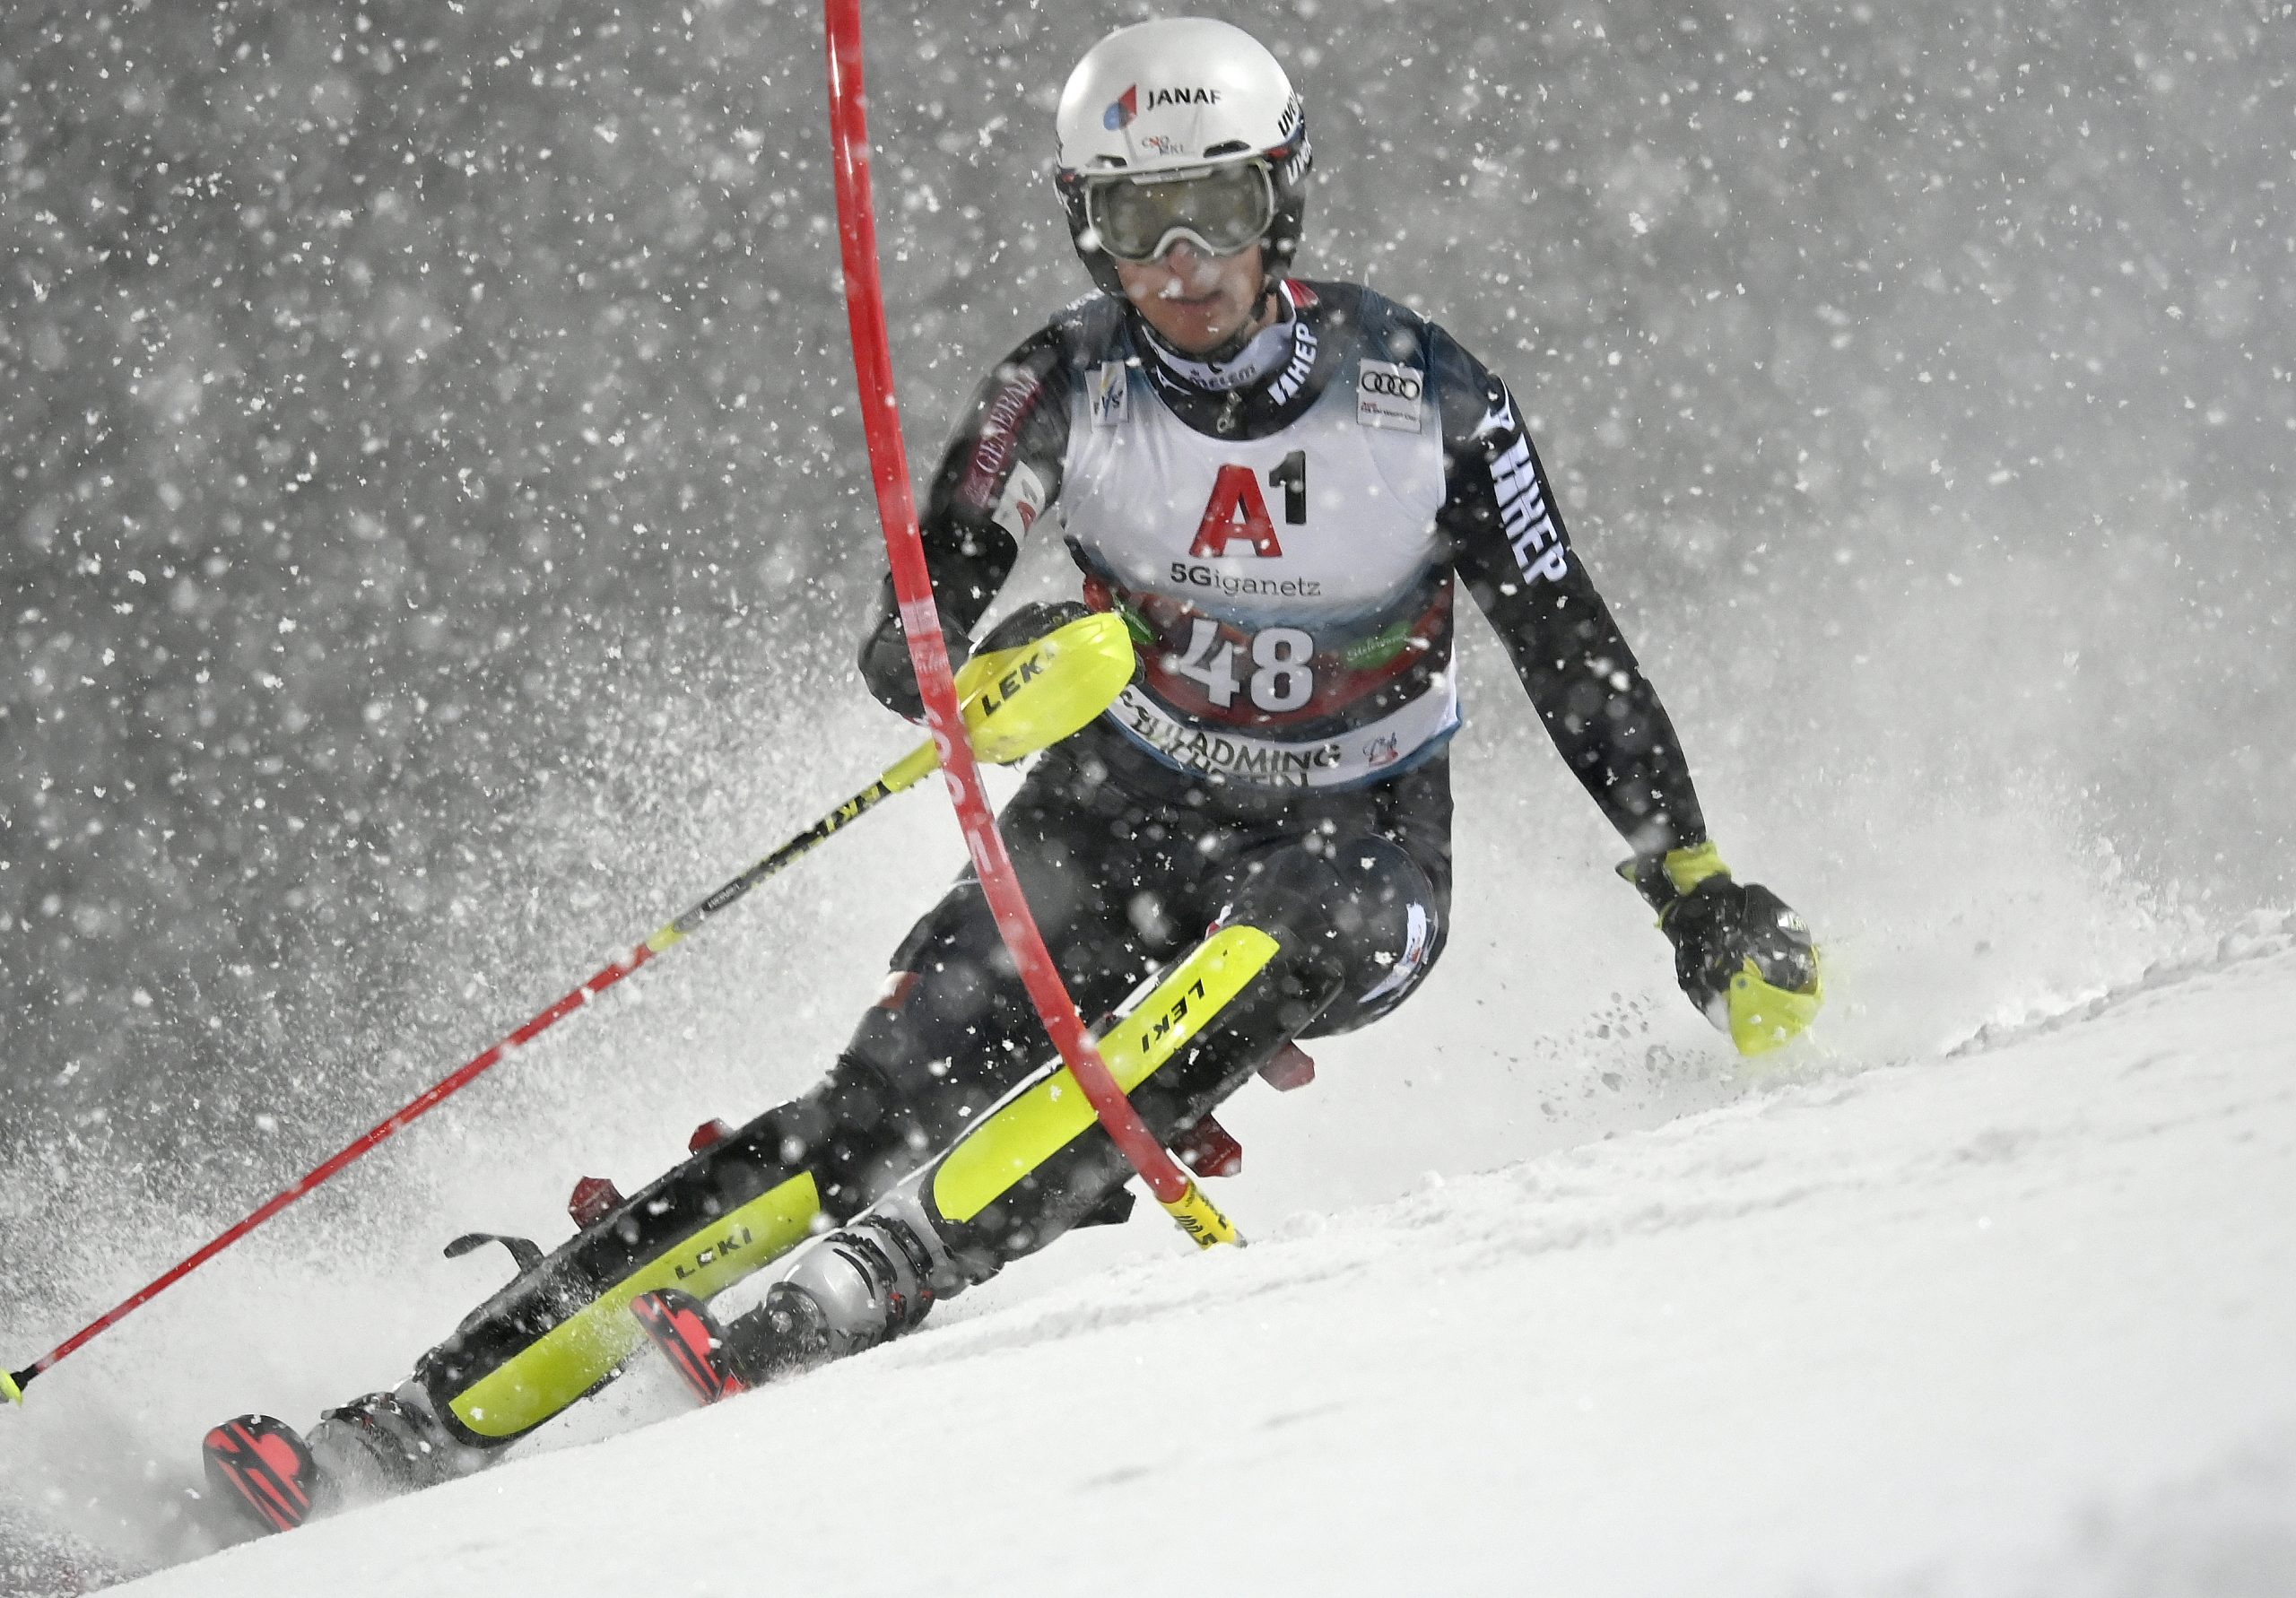 epa08967084 Samuel Kolega of Croatia in action during the first run of the men's Slalom race of the FIS Alpine Skiing World Cup event in Schladming, Austria, 26 January 2021.  EPA/CHRISTIAN BRUNA